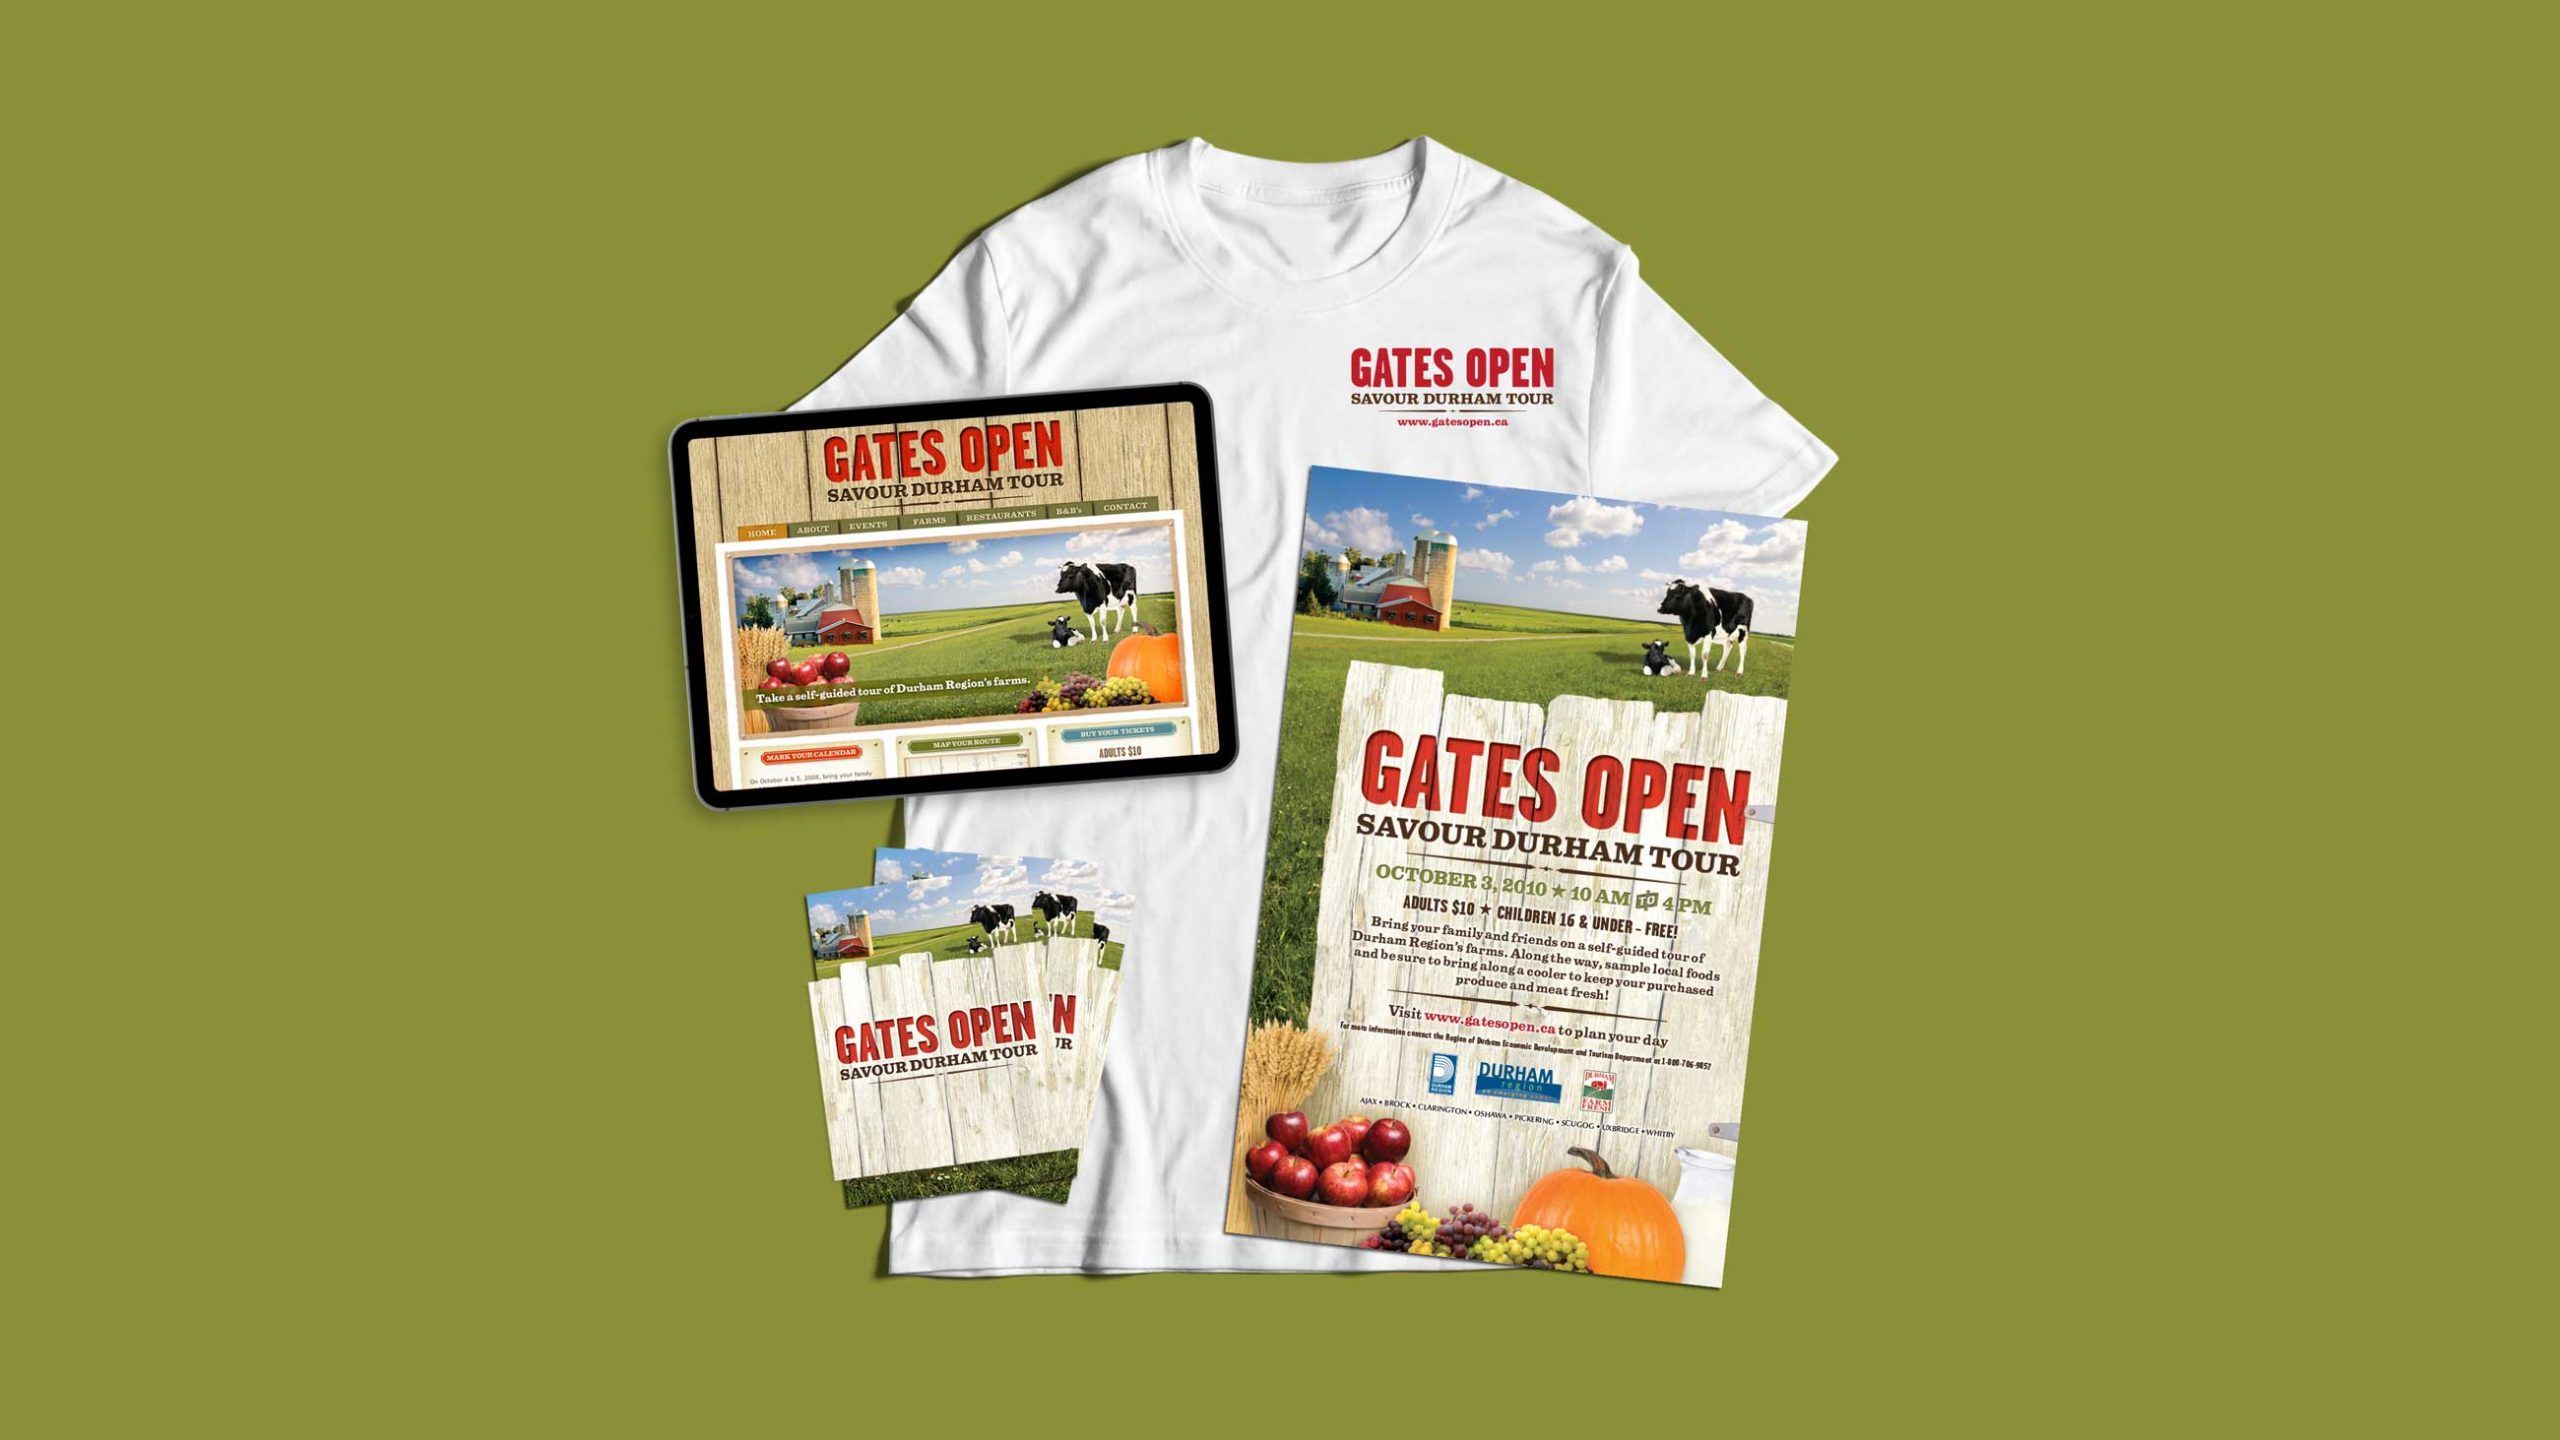 Gates Open website, t-shirt, invite and poster